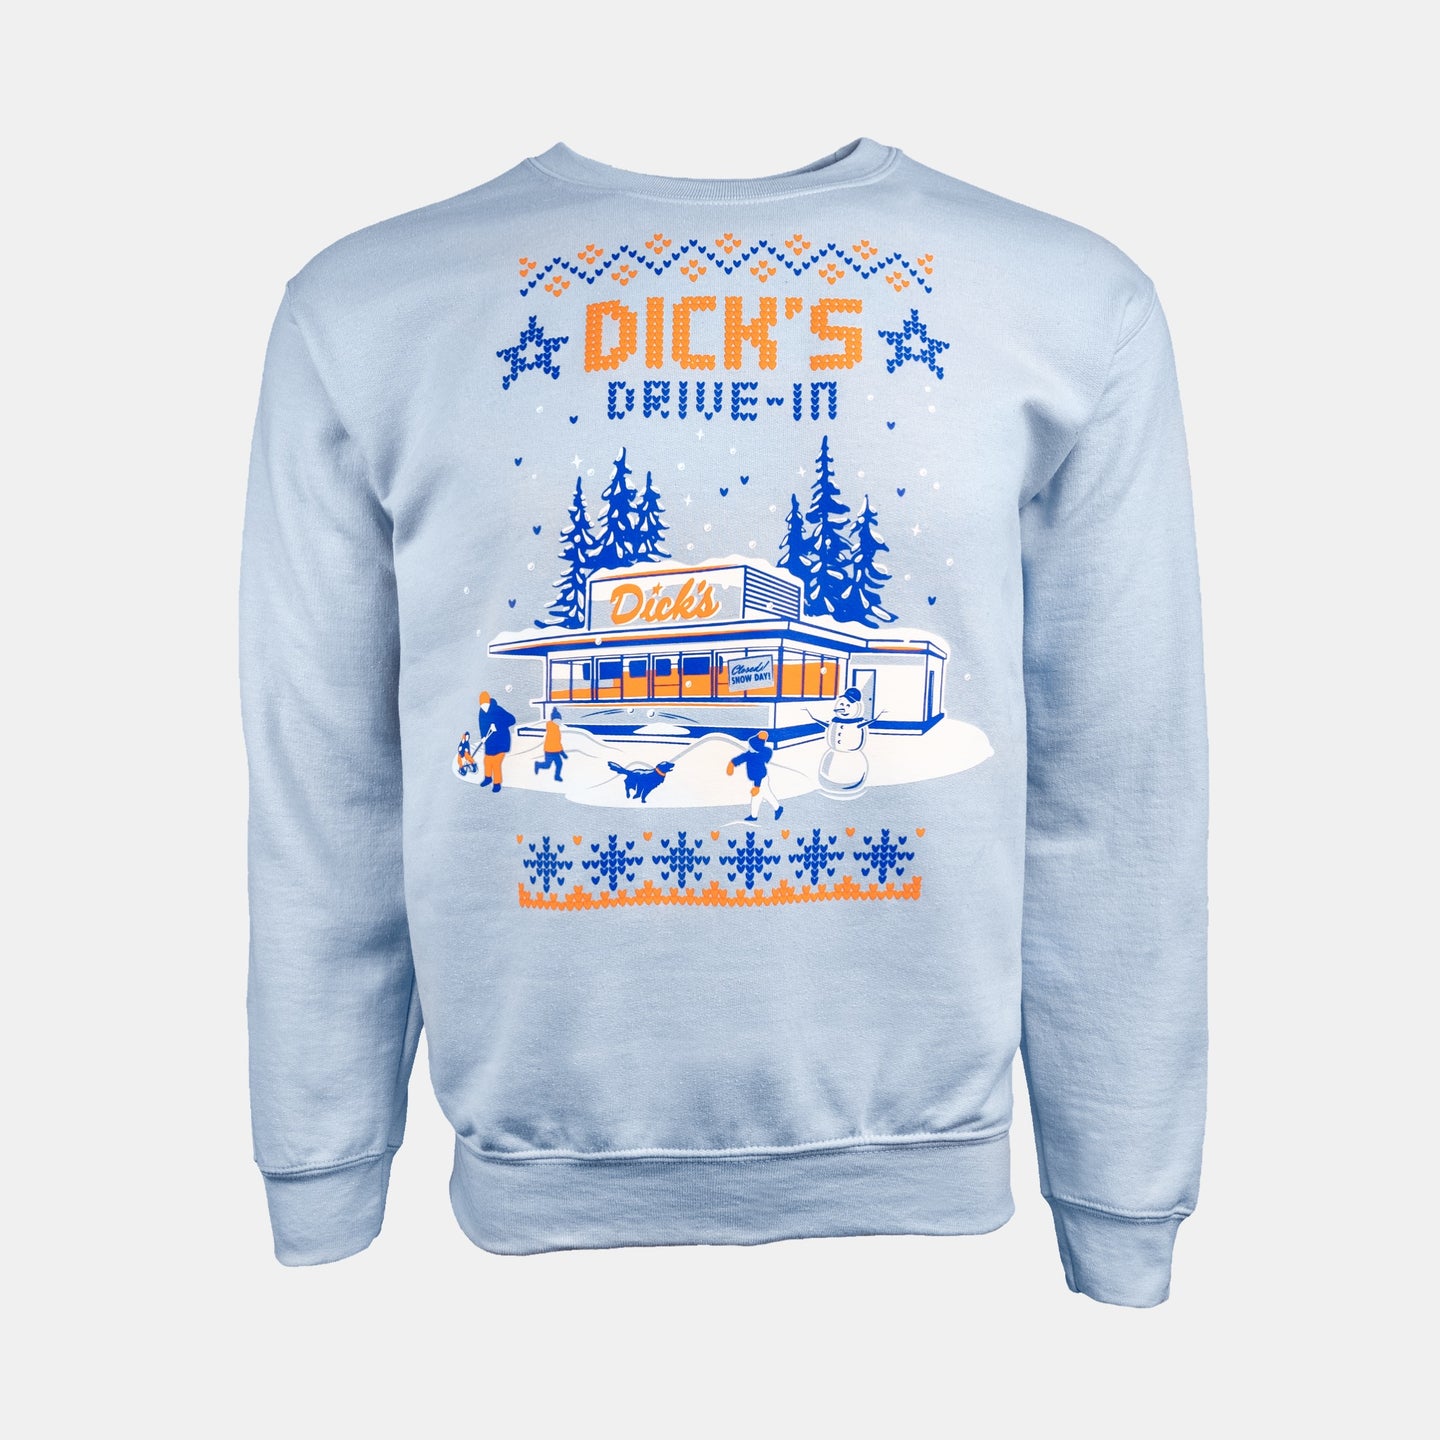 Light blue crewneck sweatshirt with orange, blue & white graphic of snow day scene in front of Dick's Drive-In restaurant